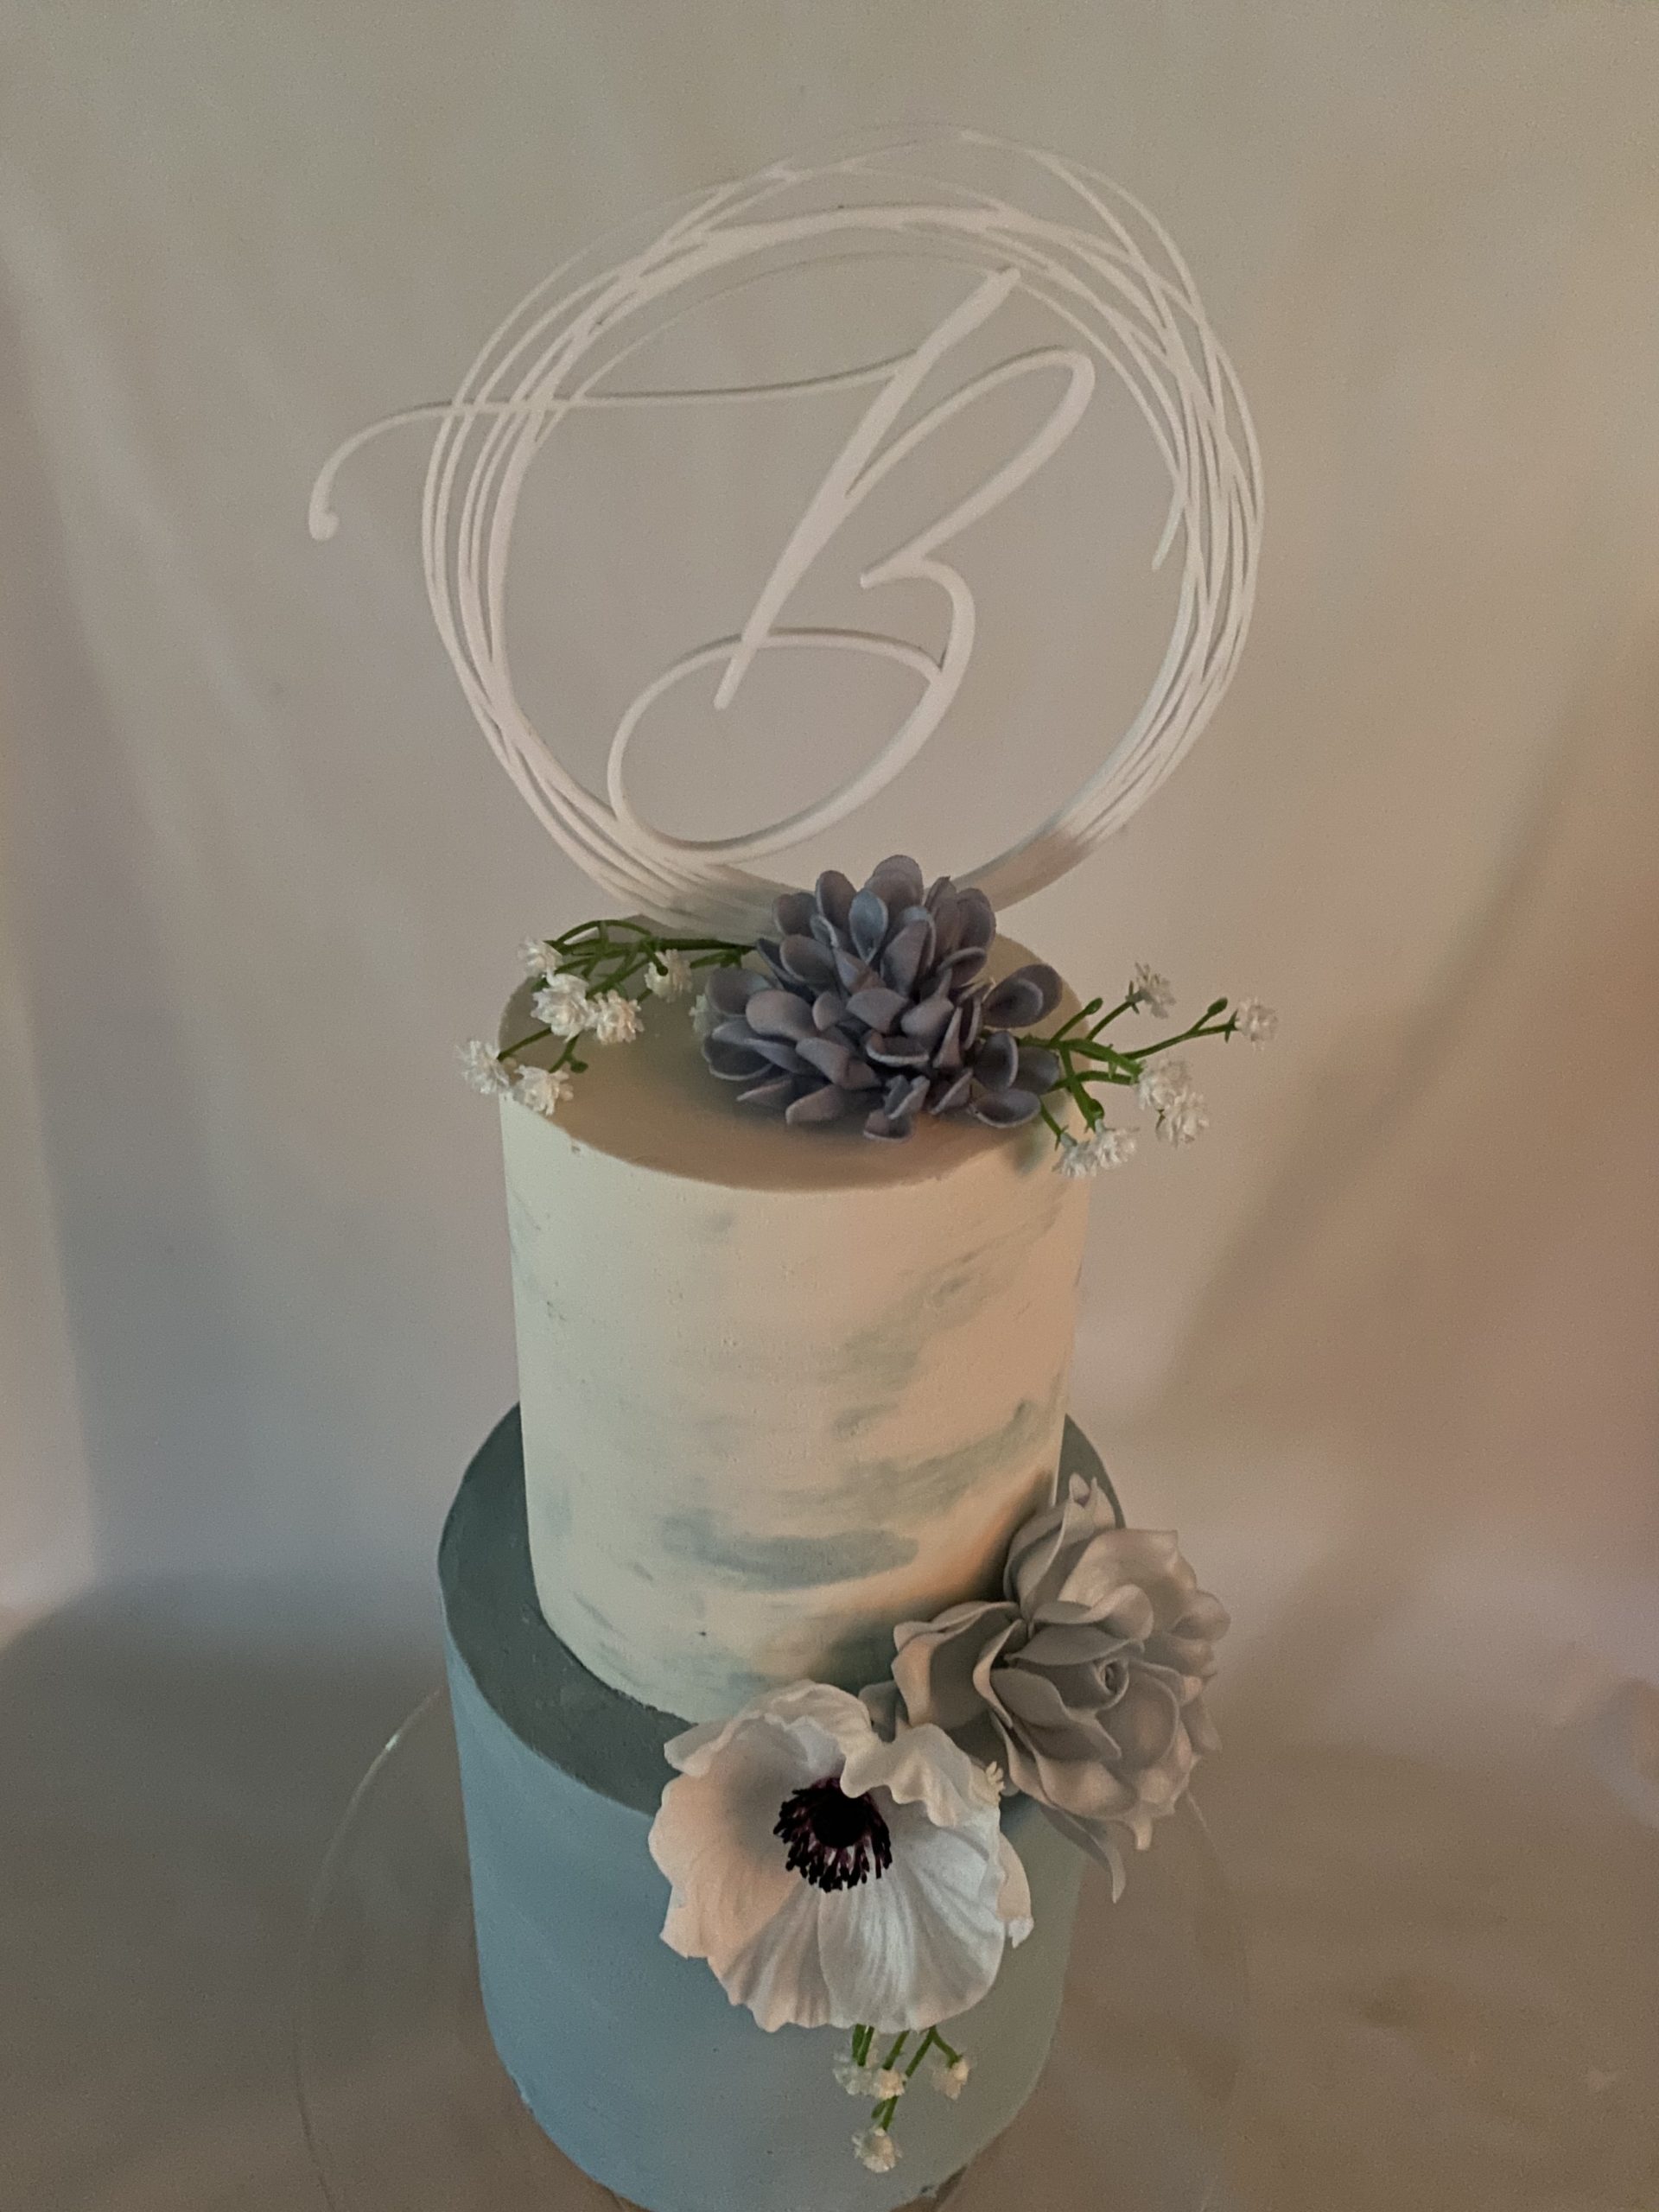 A beautiful 2-tier double barrel custom wedding cake with watercolor finish and live flowers from Village Patisserie in Toledo, Ohio